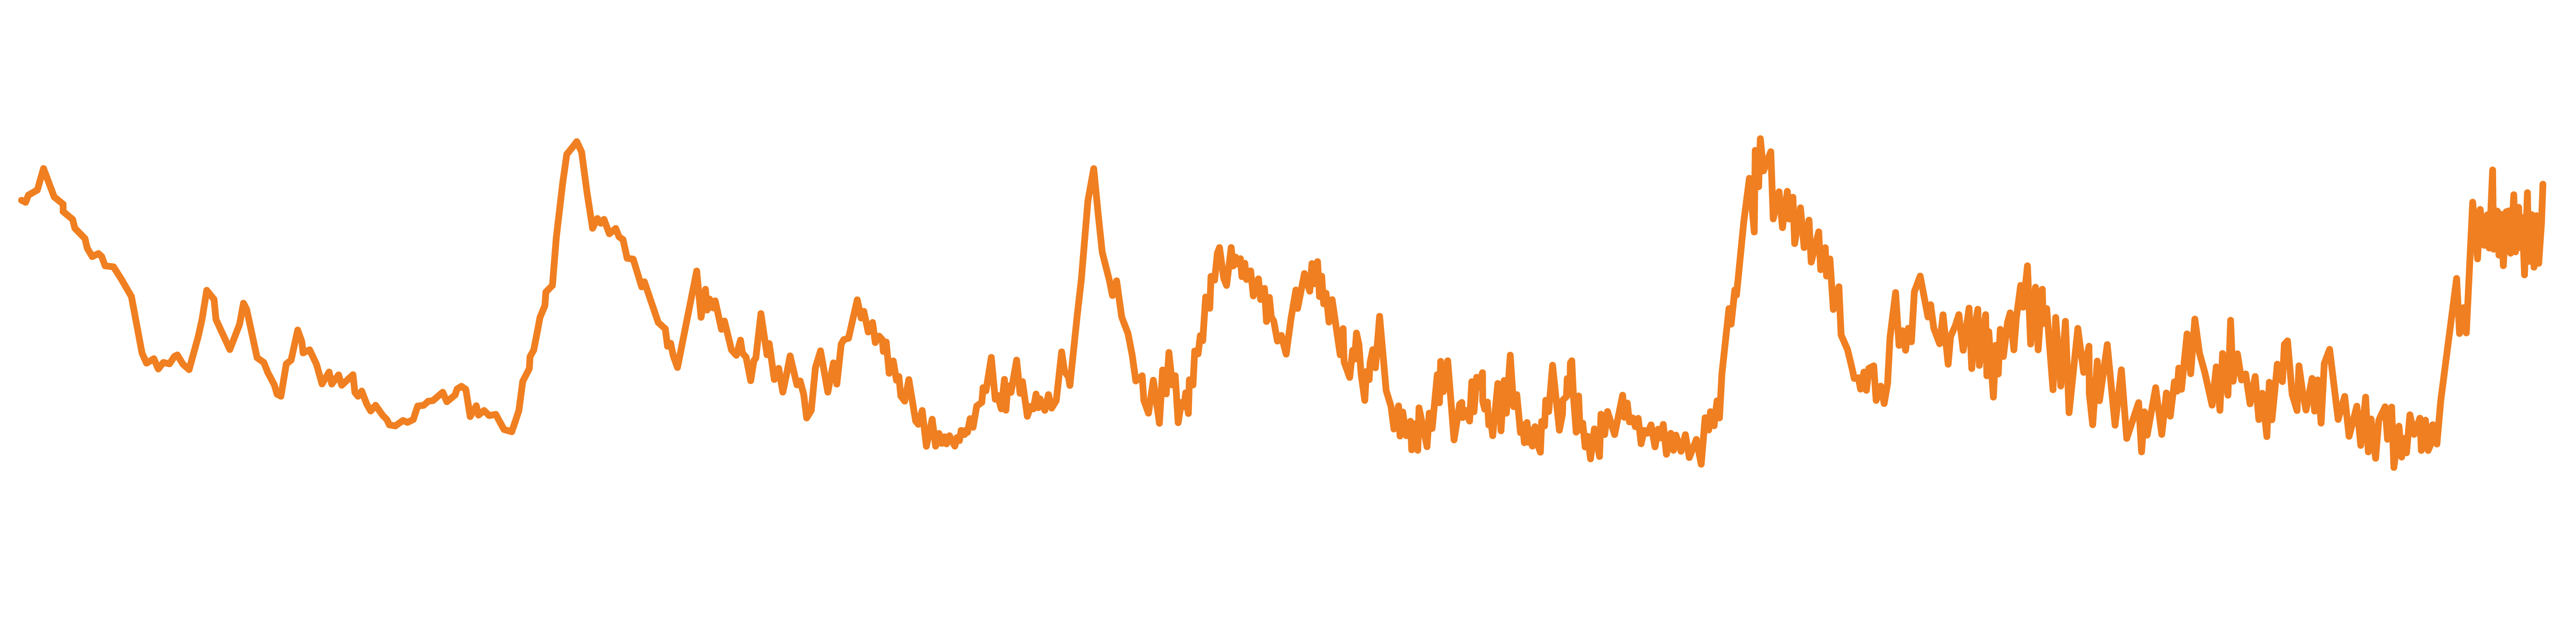 A squiggly orange line graph that goes up and down from left to right on a white background with no labels.